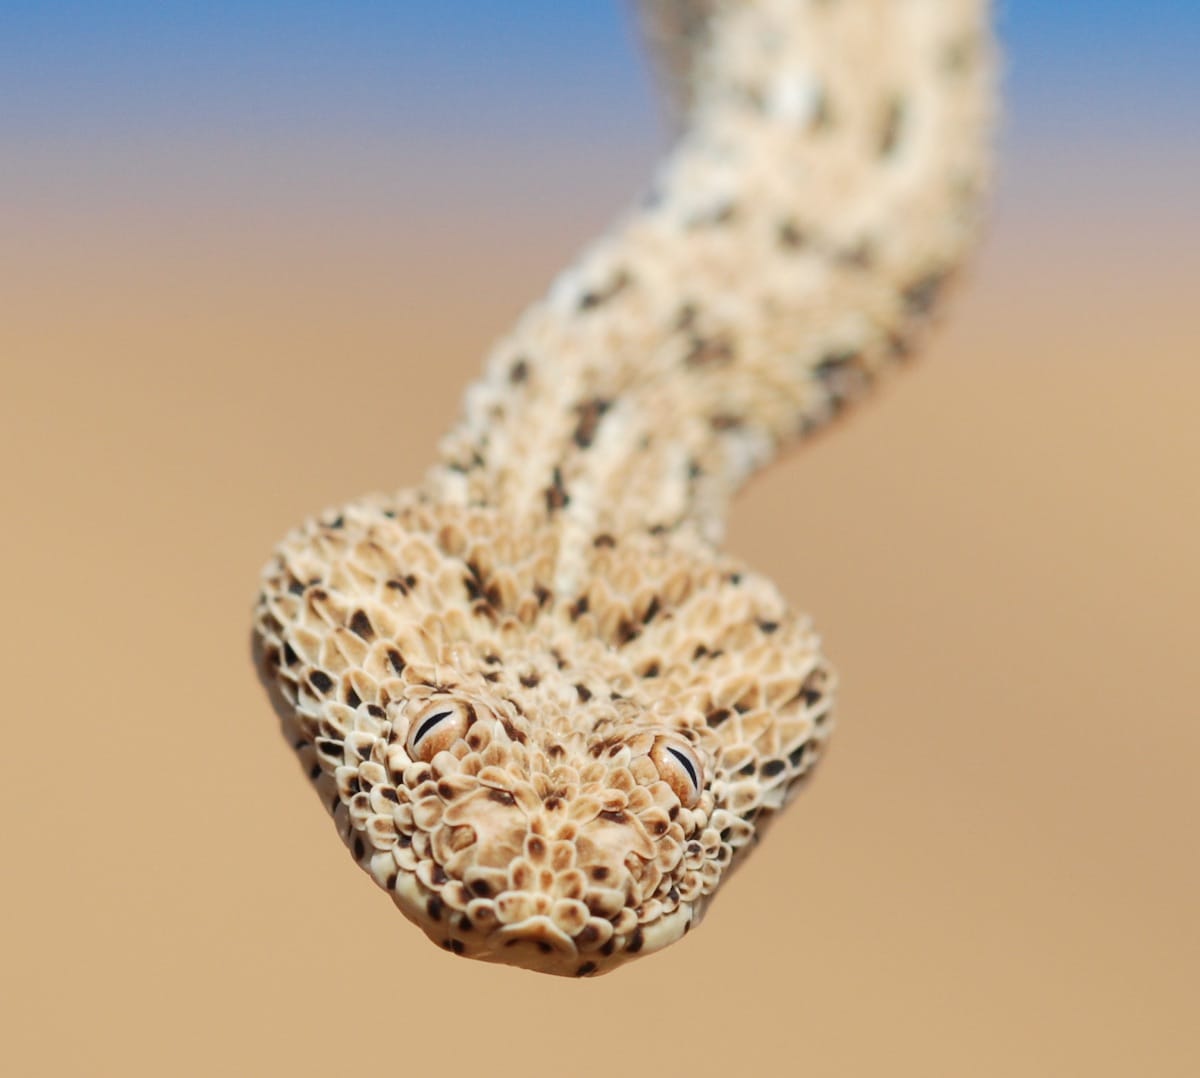 sand-colored snake with flat head and eyes on top of head